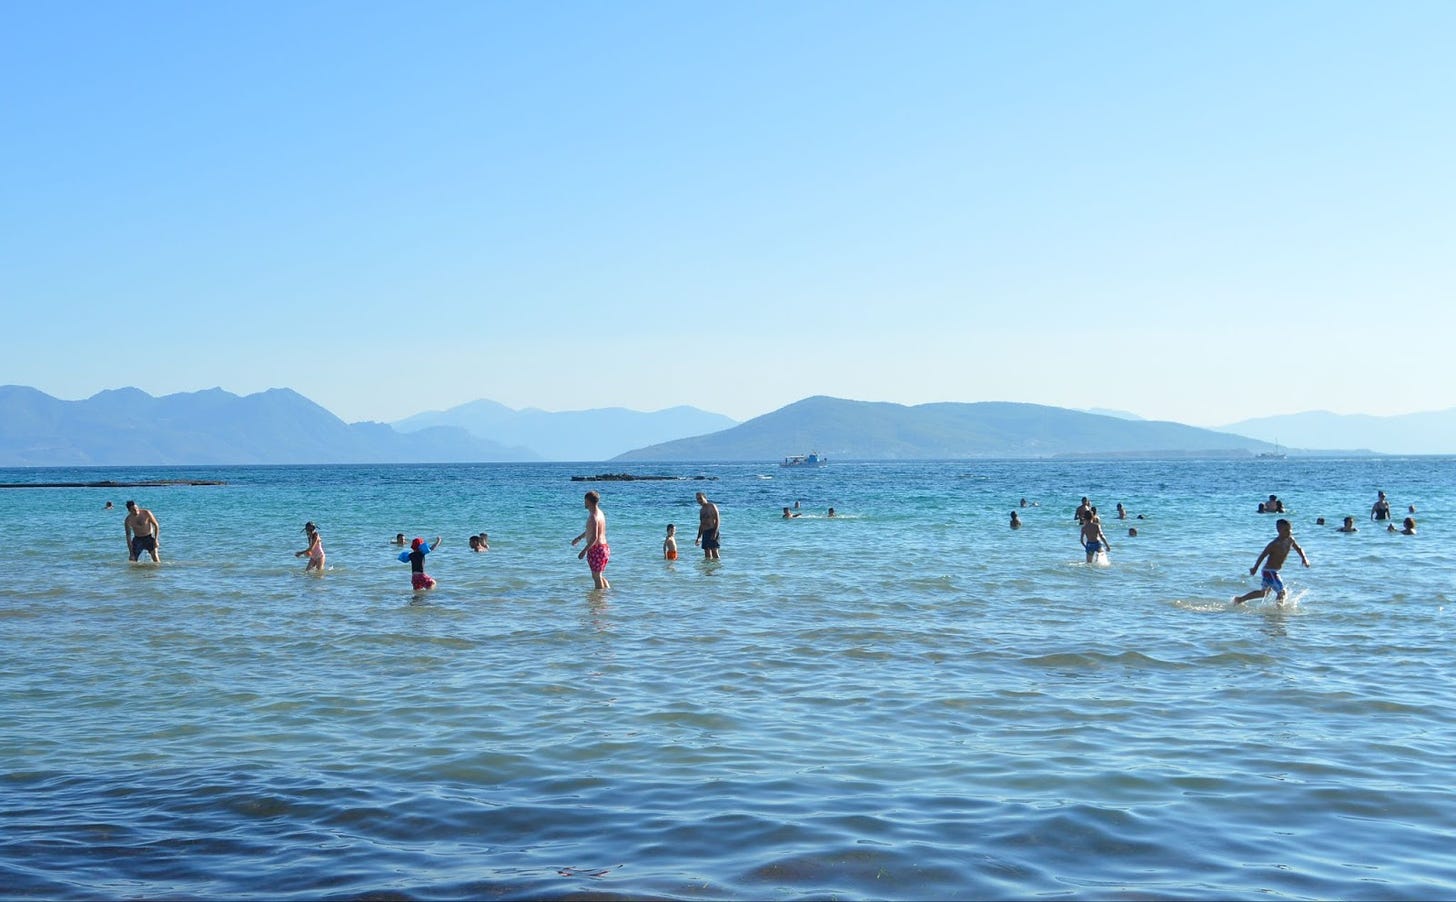 Greek Island, blue sky and blue water, people are swimming in the water